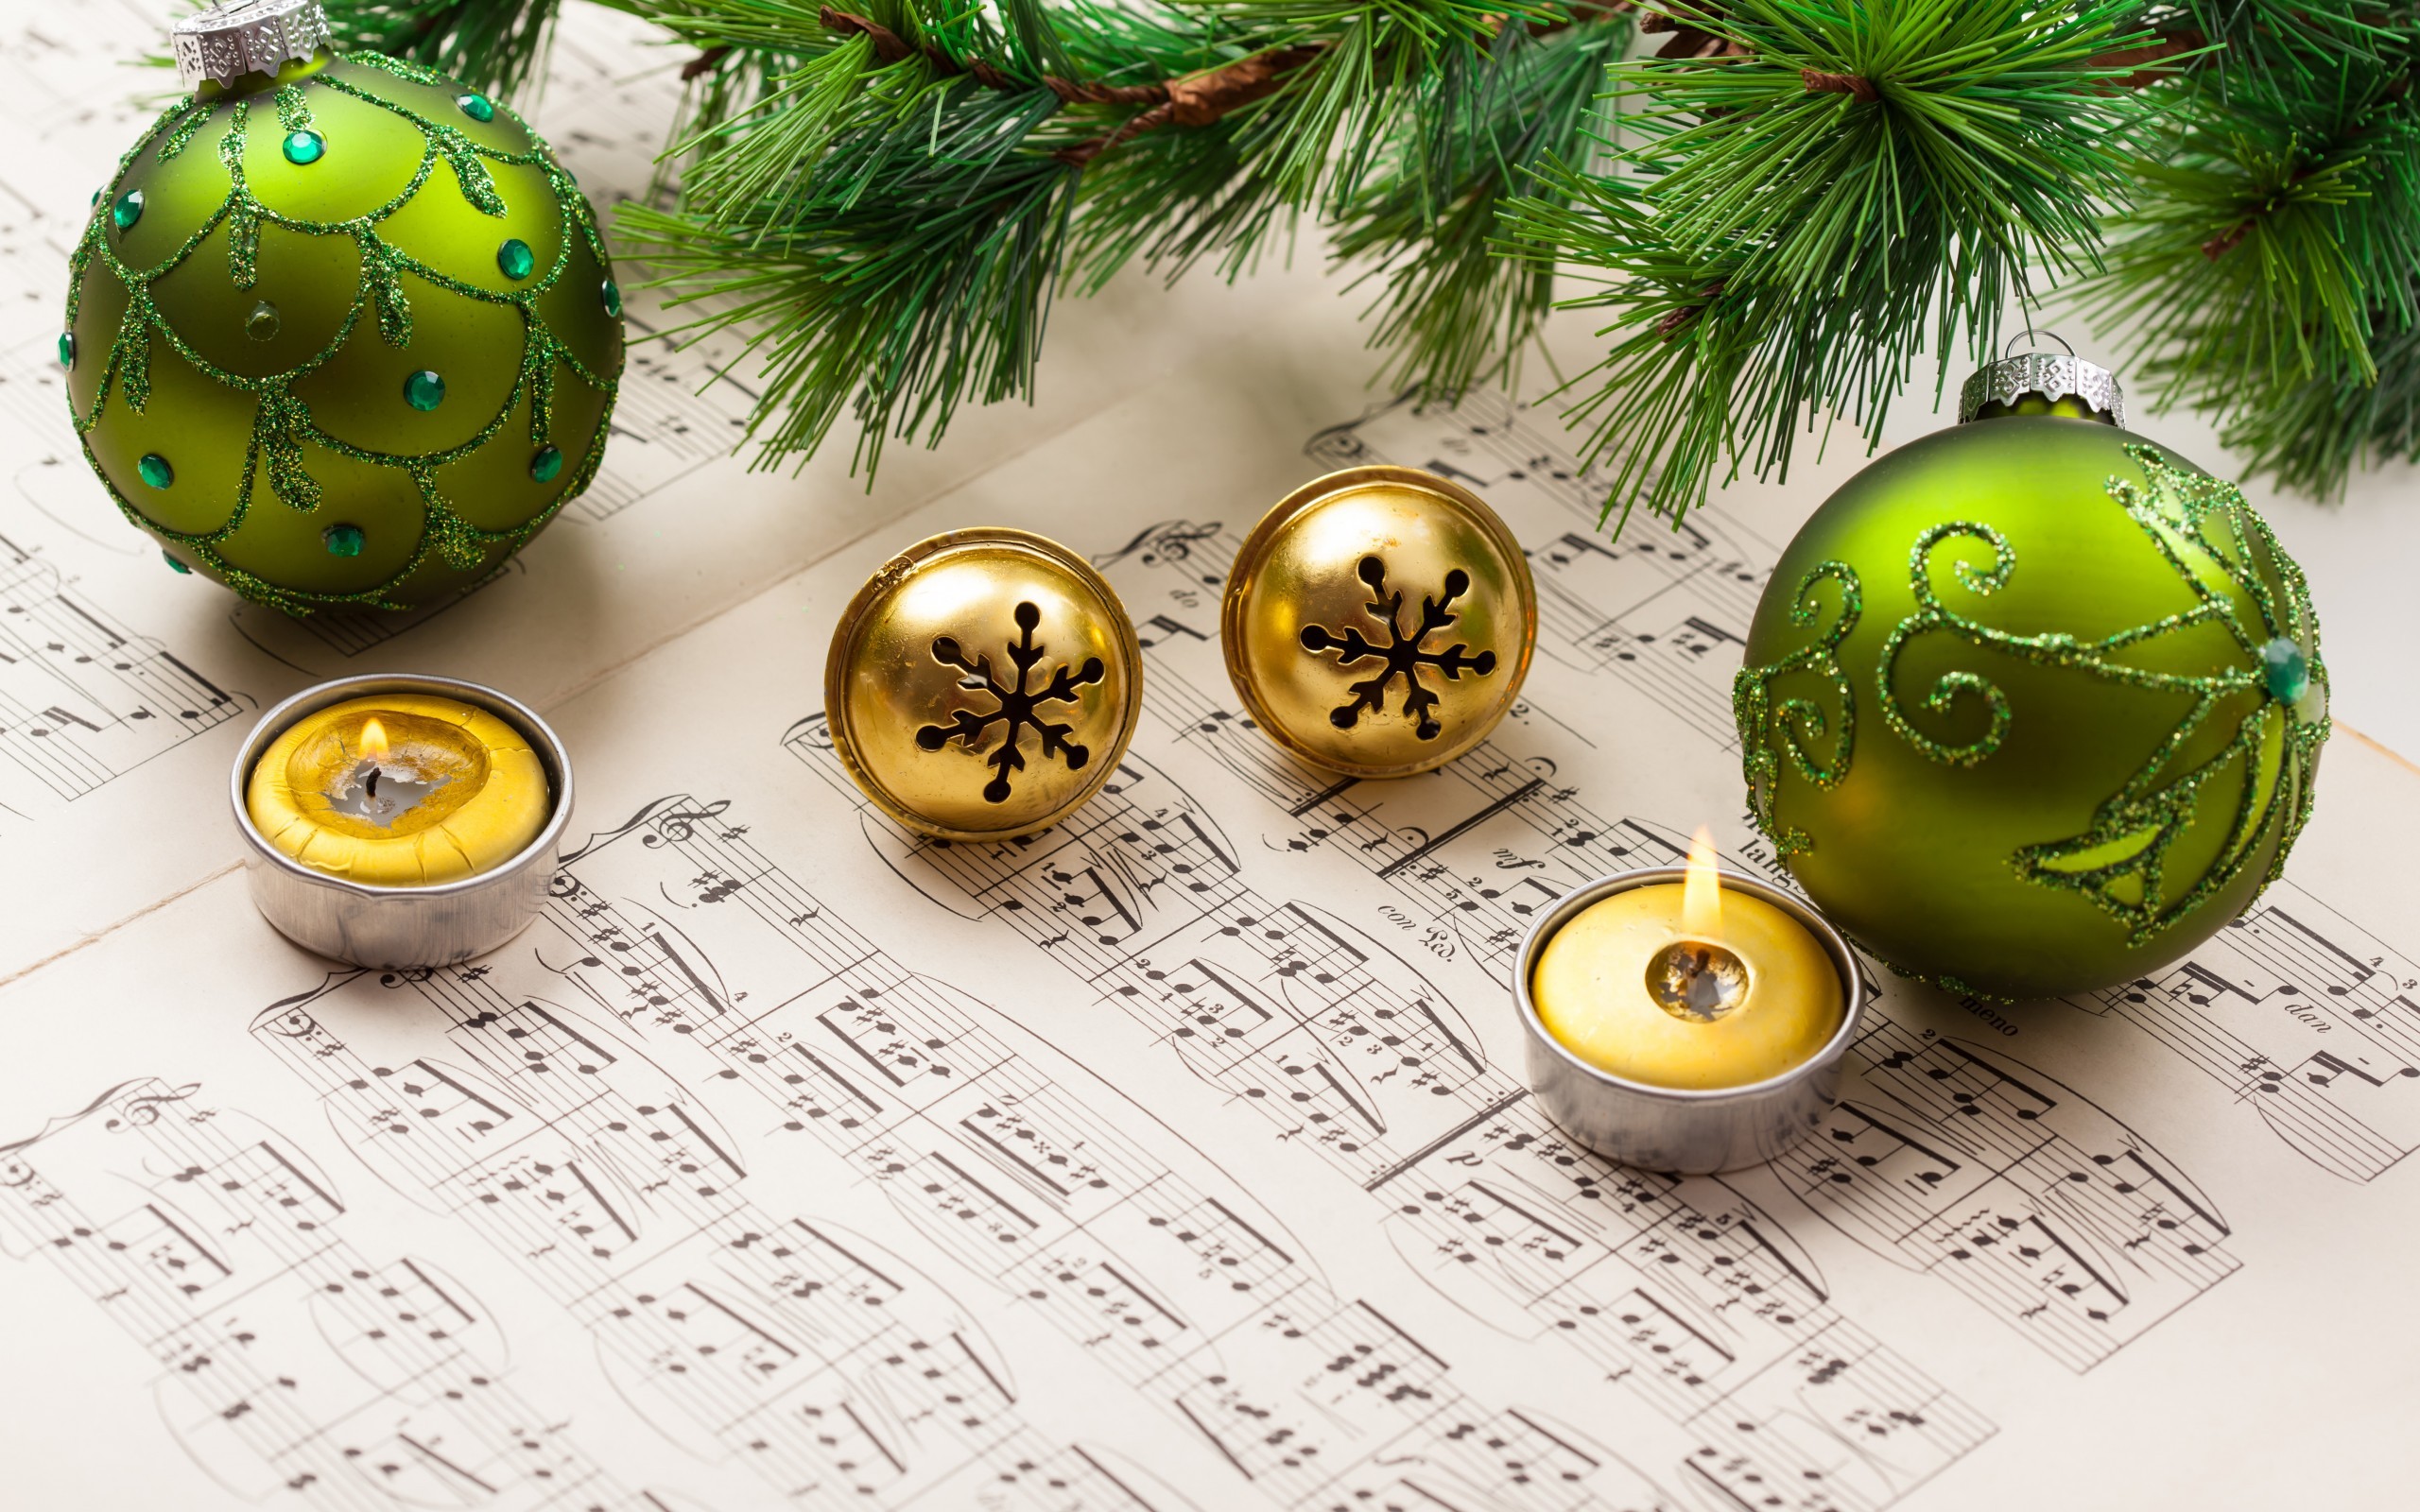 New Year, Musical Notes, Christmas Ornaments, Candles, Leaves Wallpaper